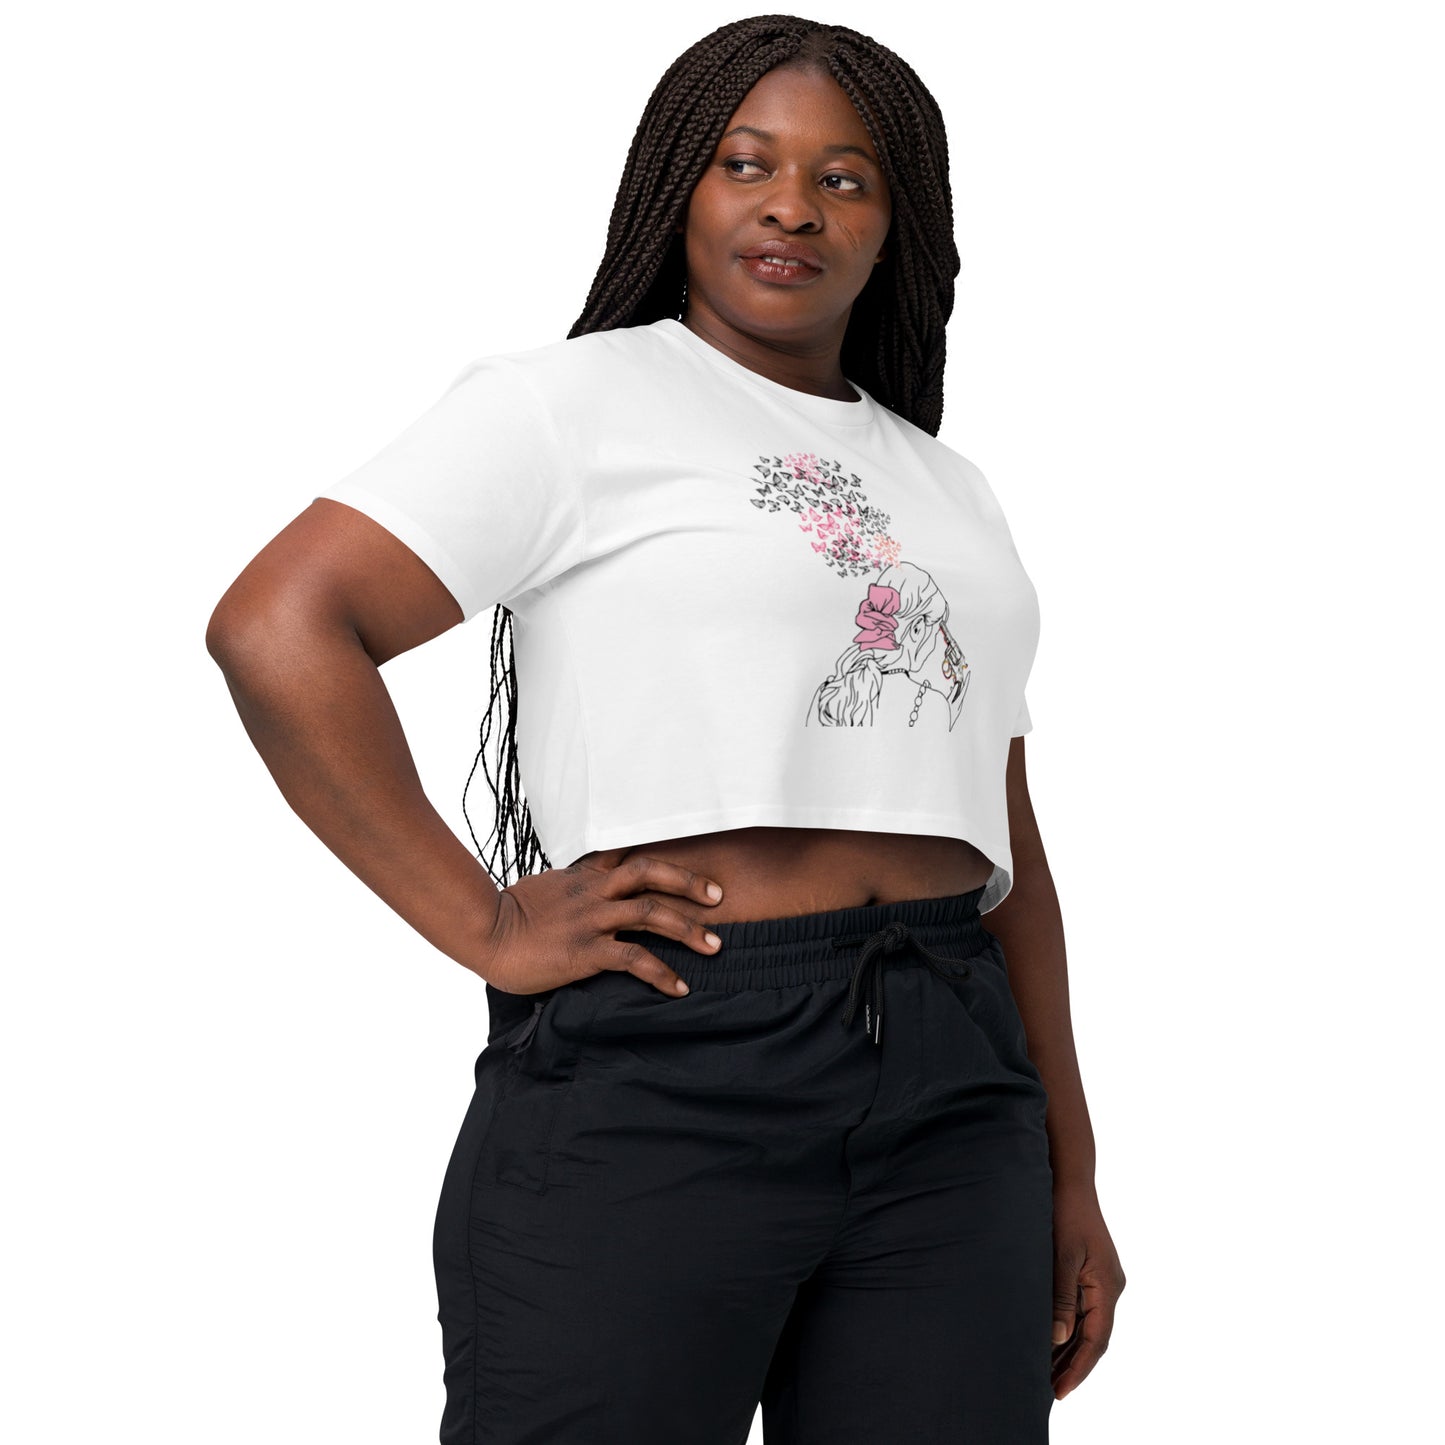 Growth in the Journey Crop Top